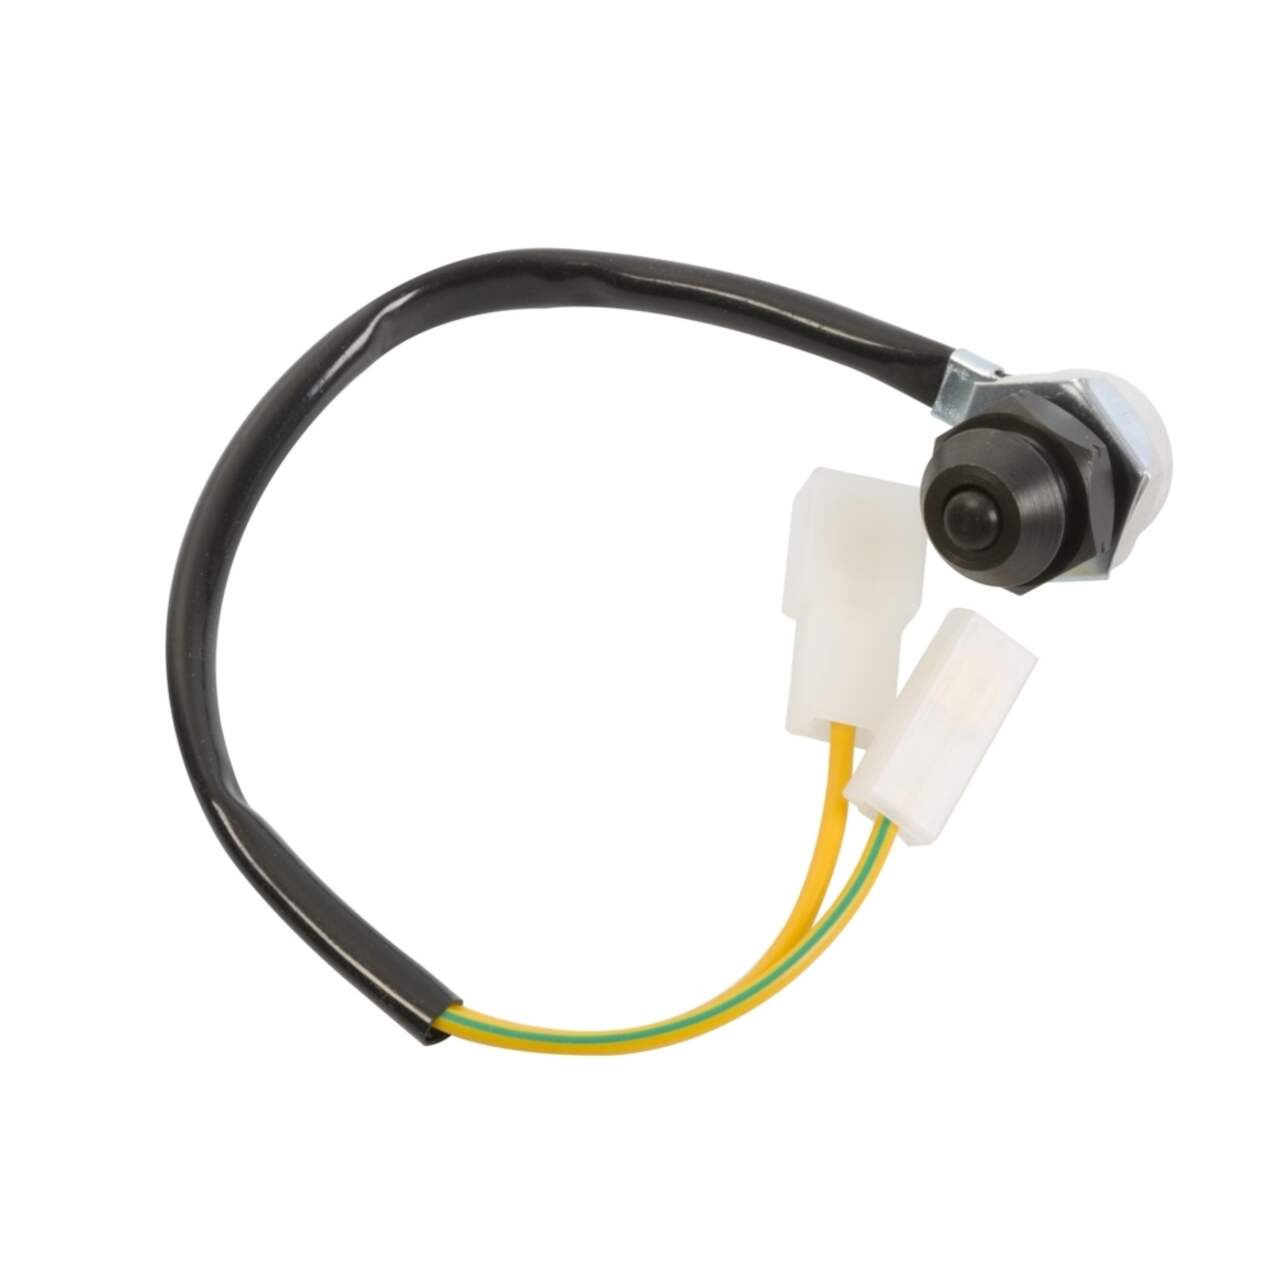 Kimpex Snowmobile Tether Safety Stop/Kill Switch, Open Circuit